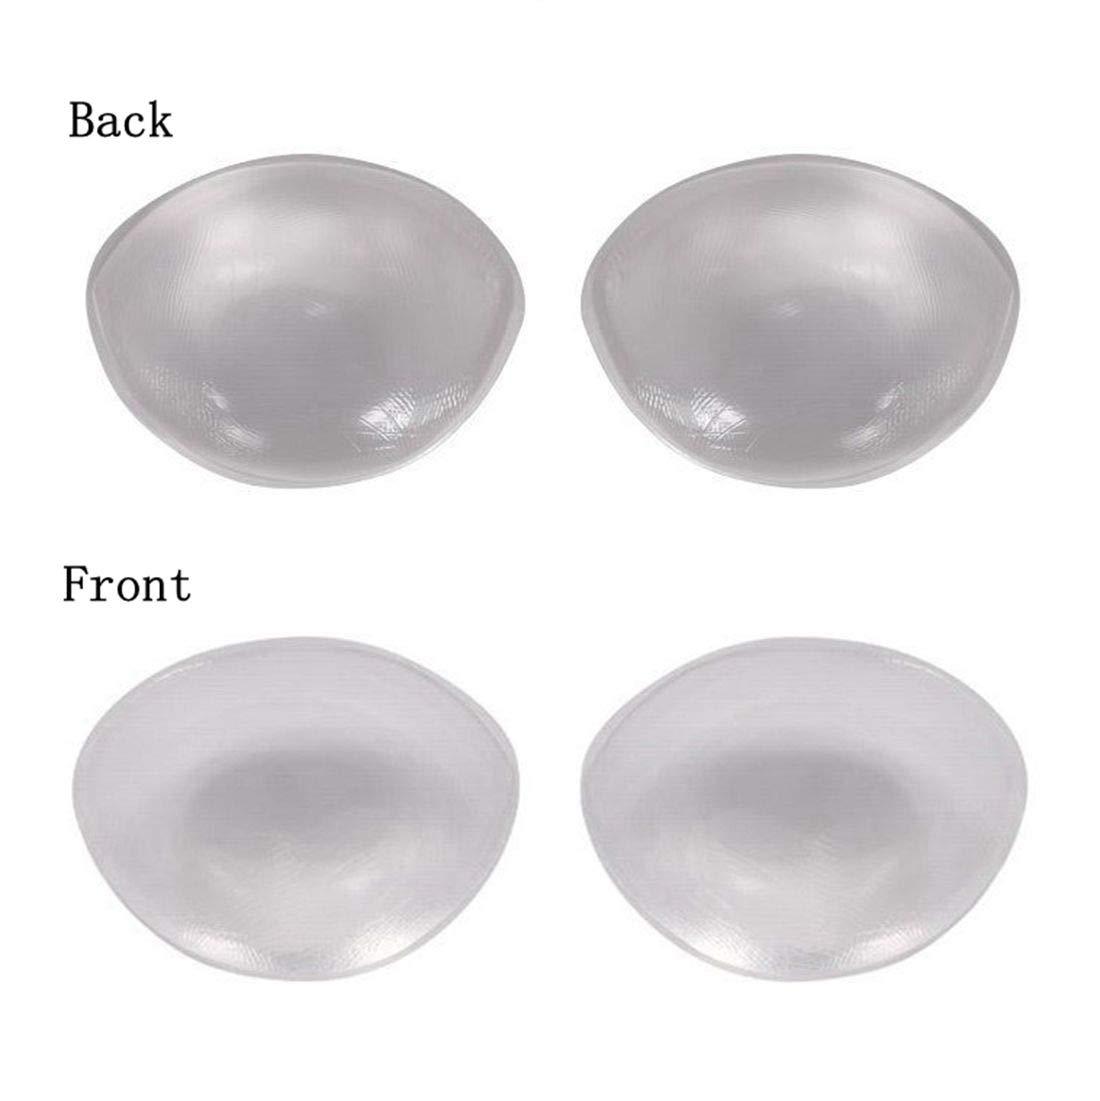 2PCS Clear Breathable Silicone Inserts Pads Breast Enhancers Push-up Bra  Insert Pad Swimwear Push up Booster Pads (Clear)